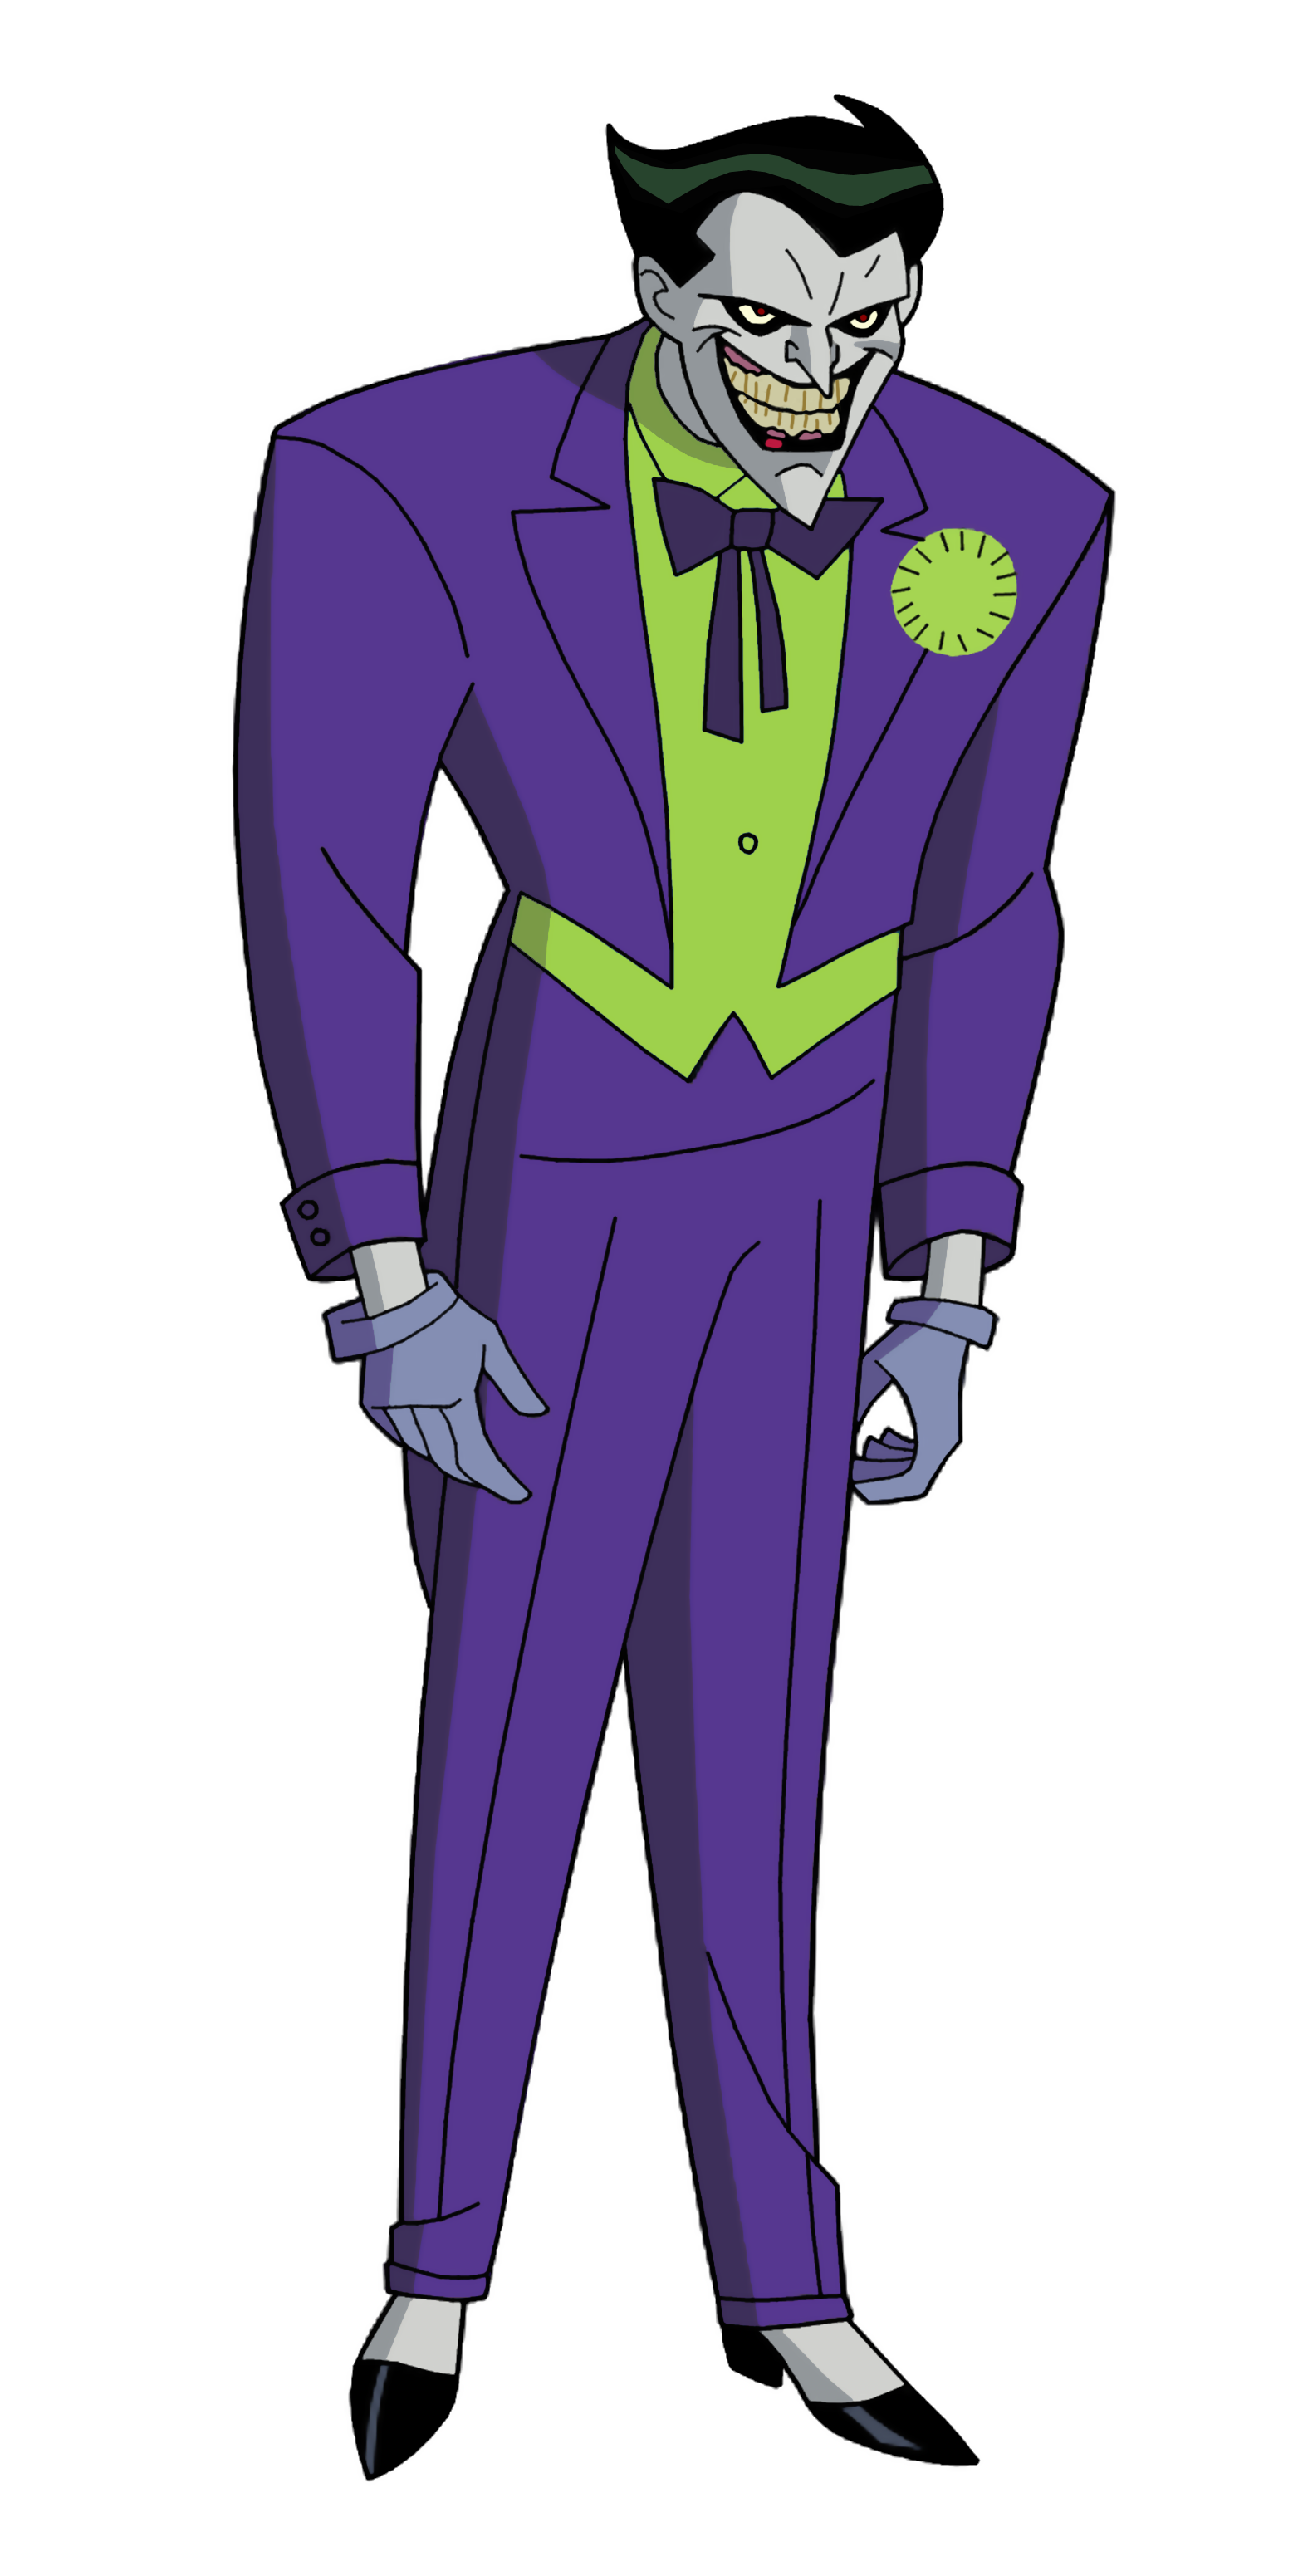 joker_bruce_timm_style_new_look_by_noahlc-d9tfhn2.png